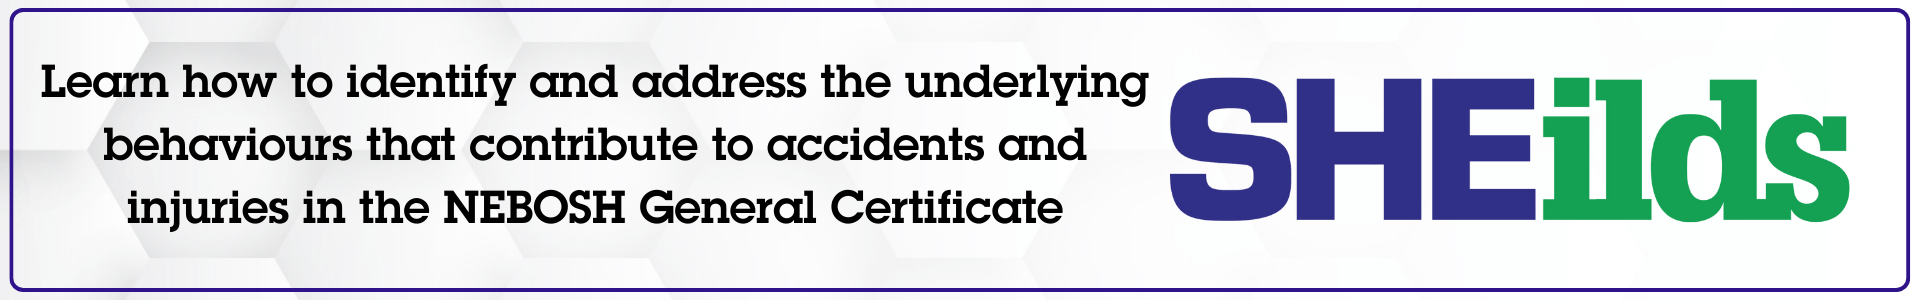 Learn how to identify and address the underlying behaviors that contribute to accidents and injures with the NEBOSH General Certificate